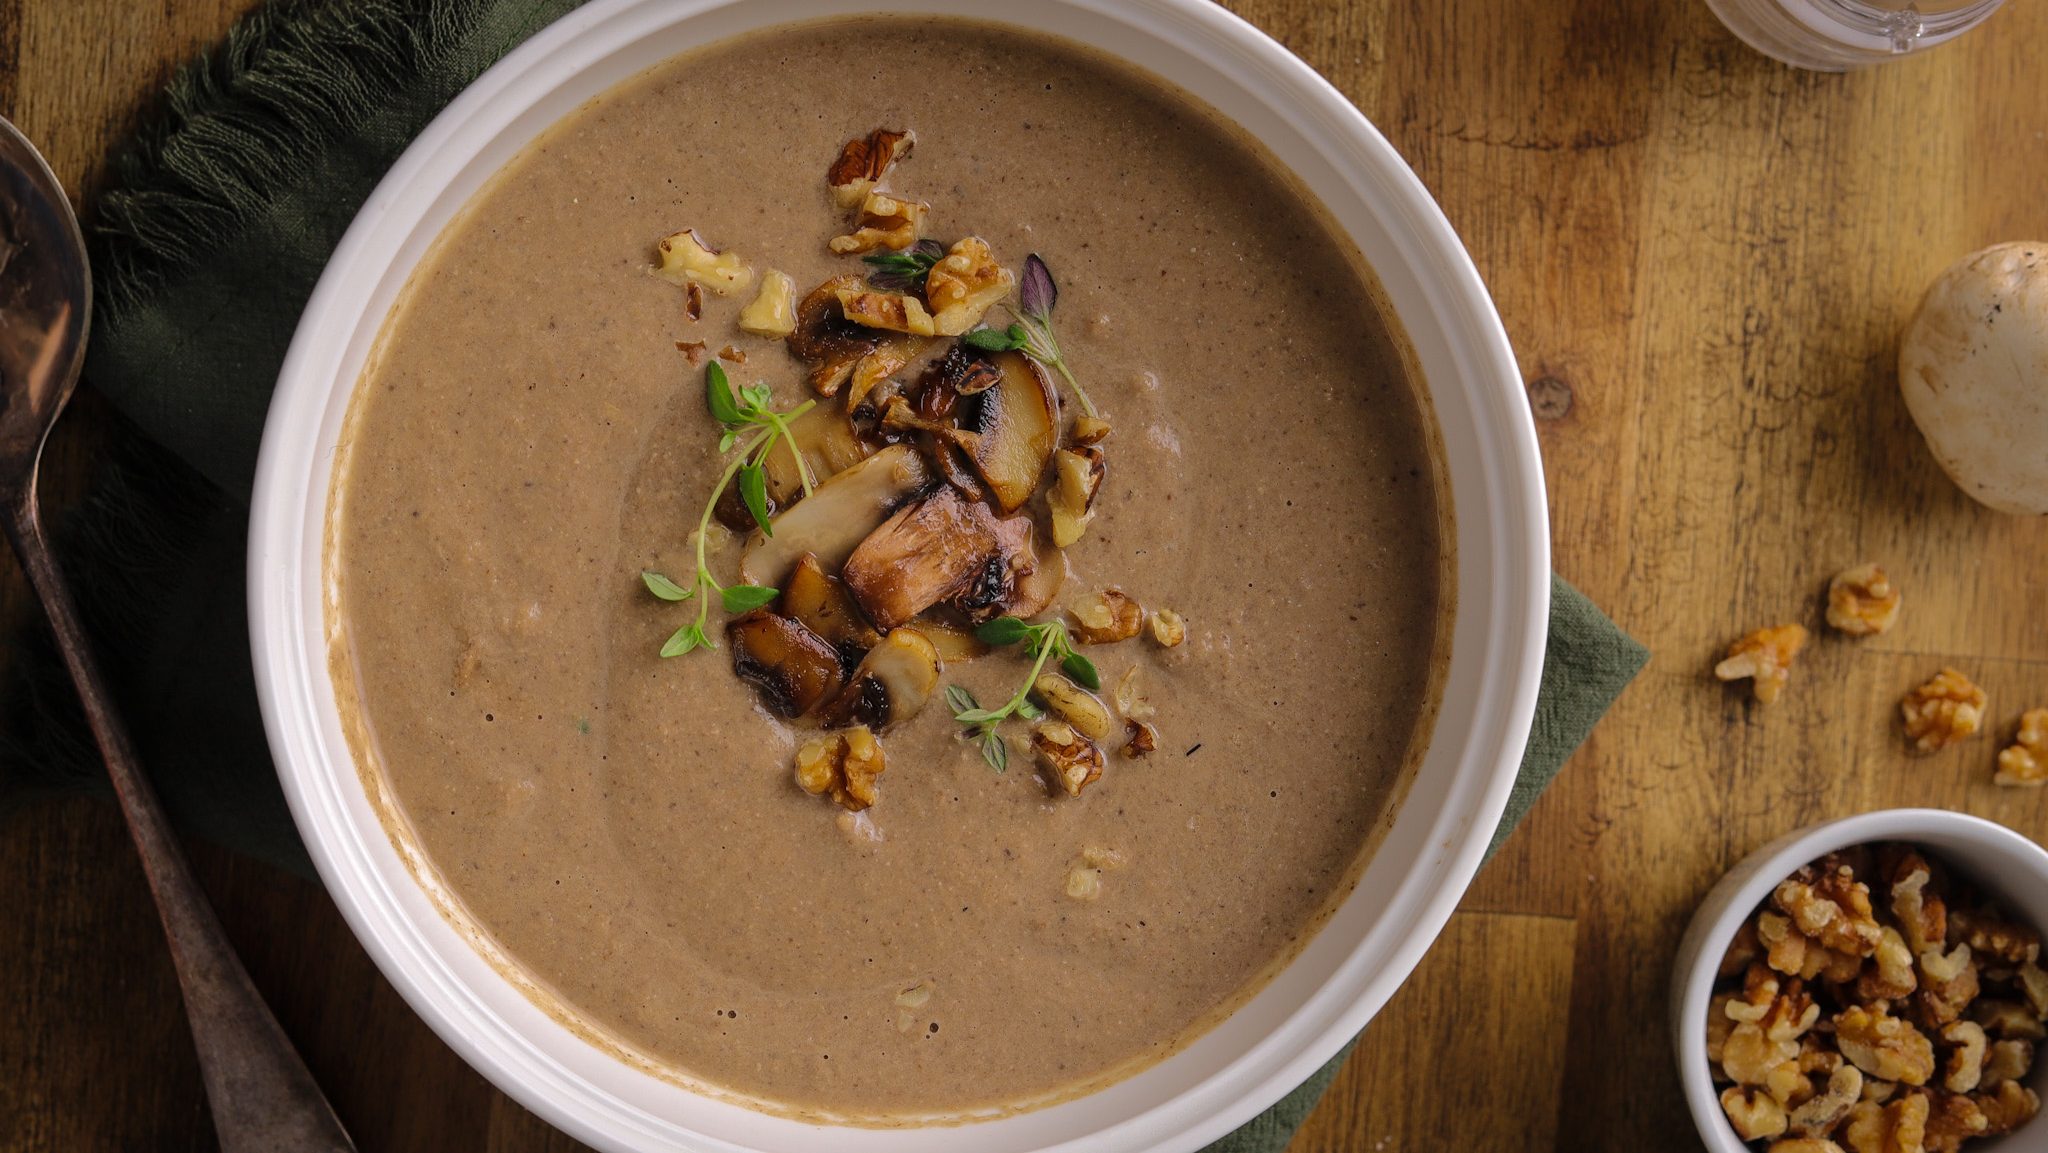 A bowl of thick brown creamy soup with mushroom slices and walnuts pieces on top.